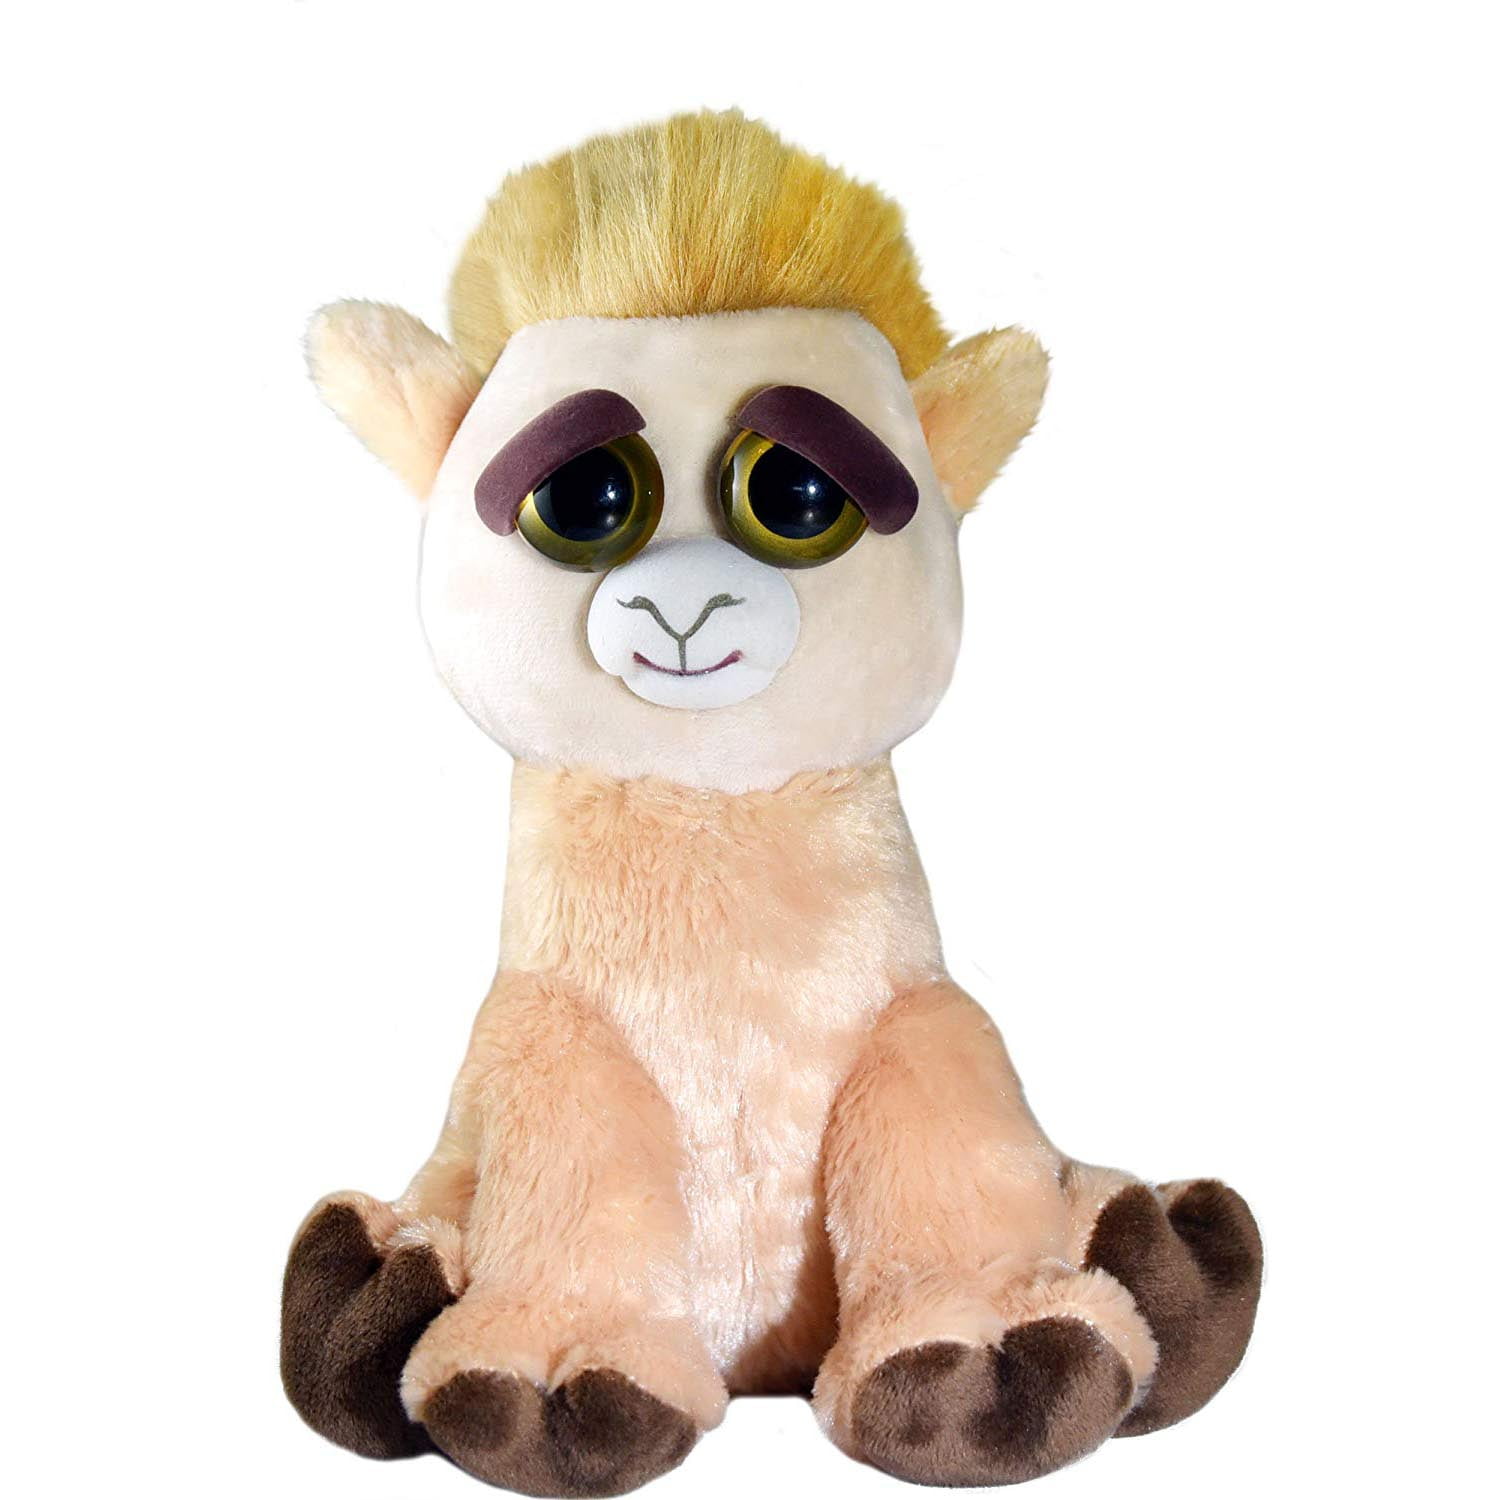 William Mark Feisty Pets Grandmaster Funk Adorable Plush Stuffed Monkey That a for sale online 